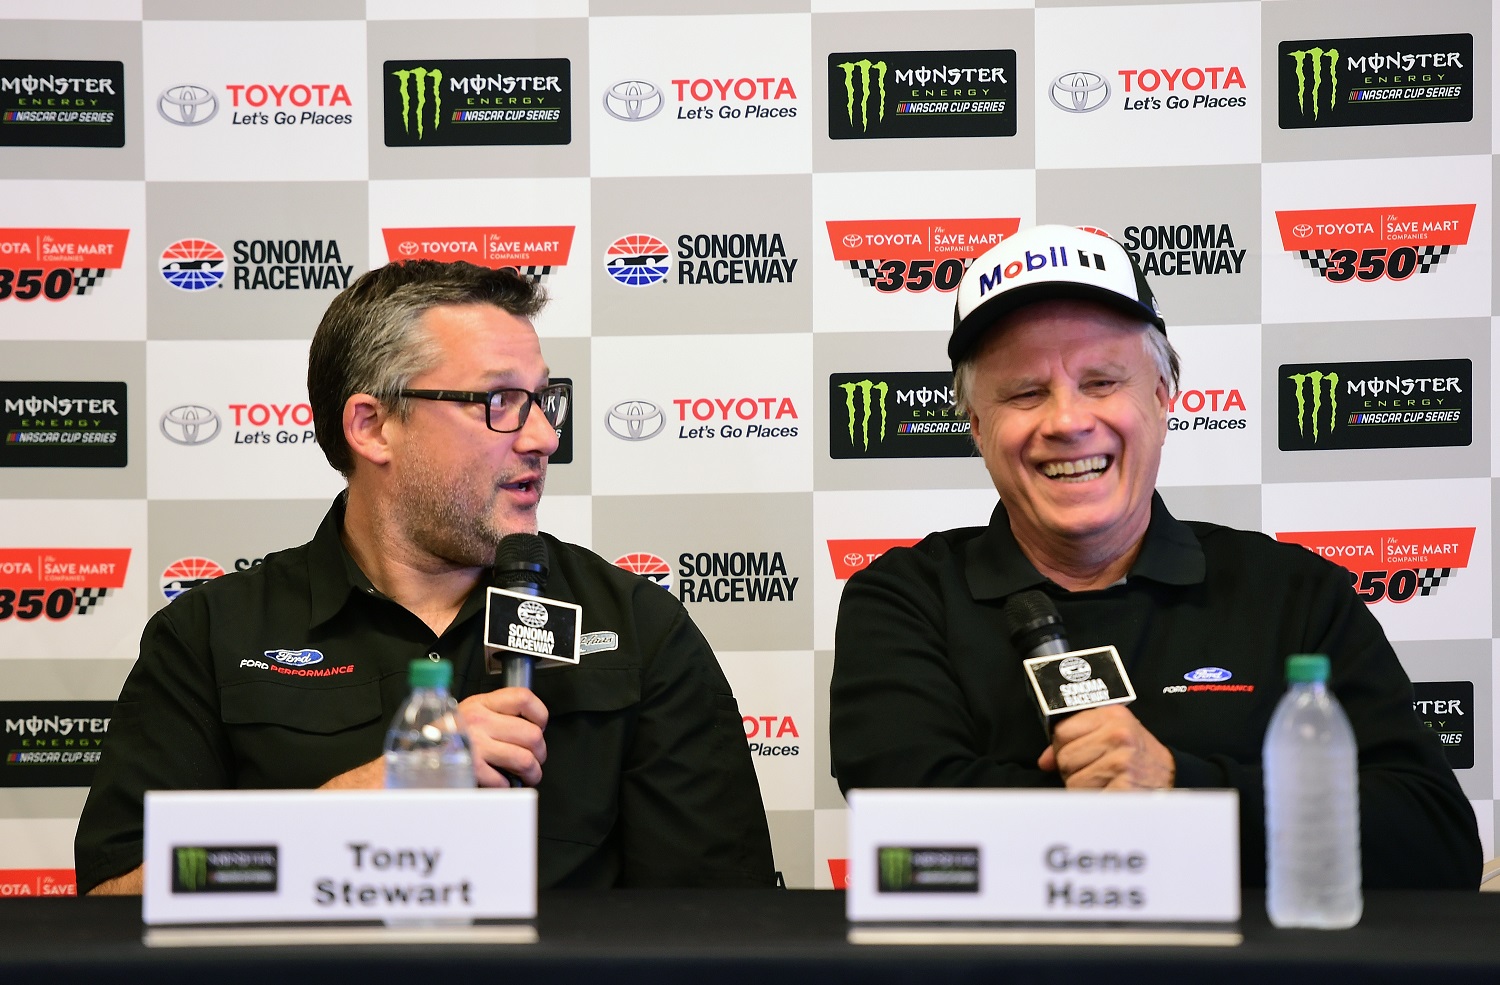 Tony Stewart and Gene Haas talk to the media after the Monster Energy NASCAR Cup Series Toyota/Save Mart 350 at Sonoma Raceway on June 25, 2017.